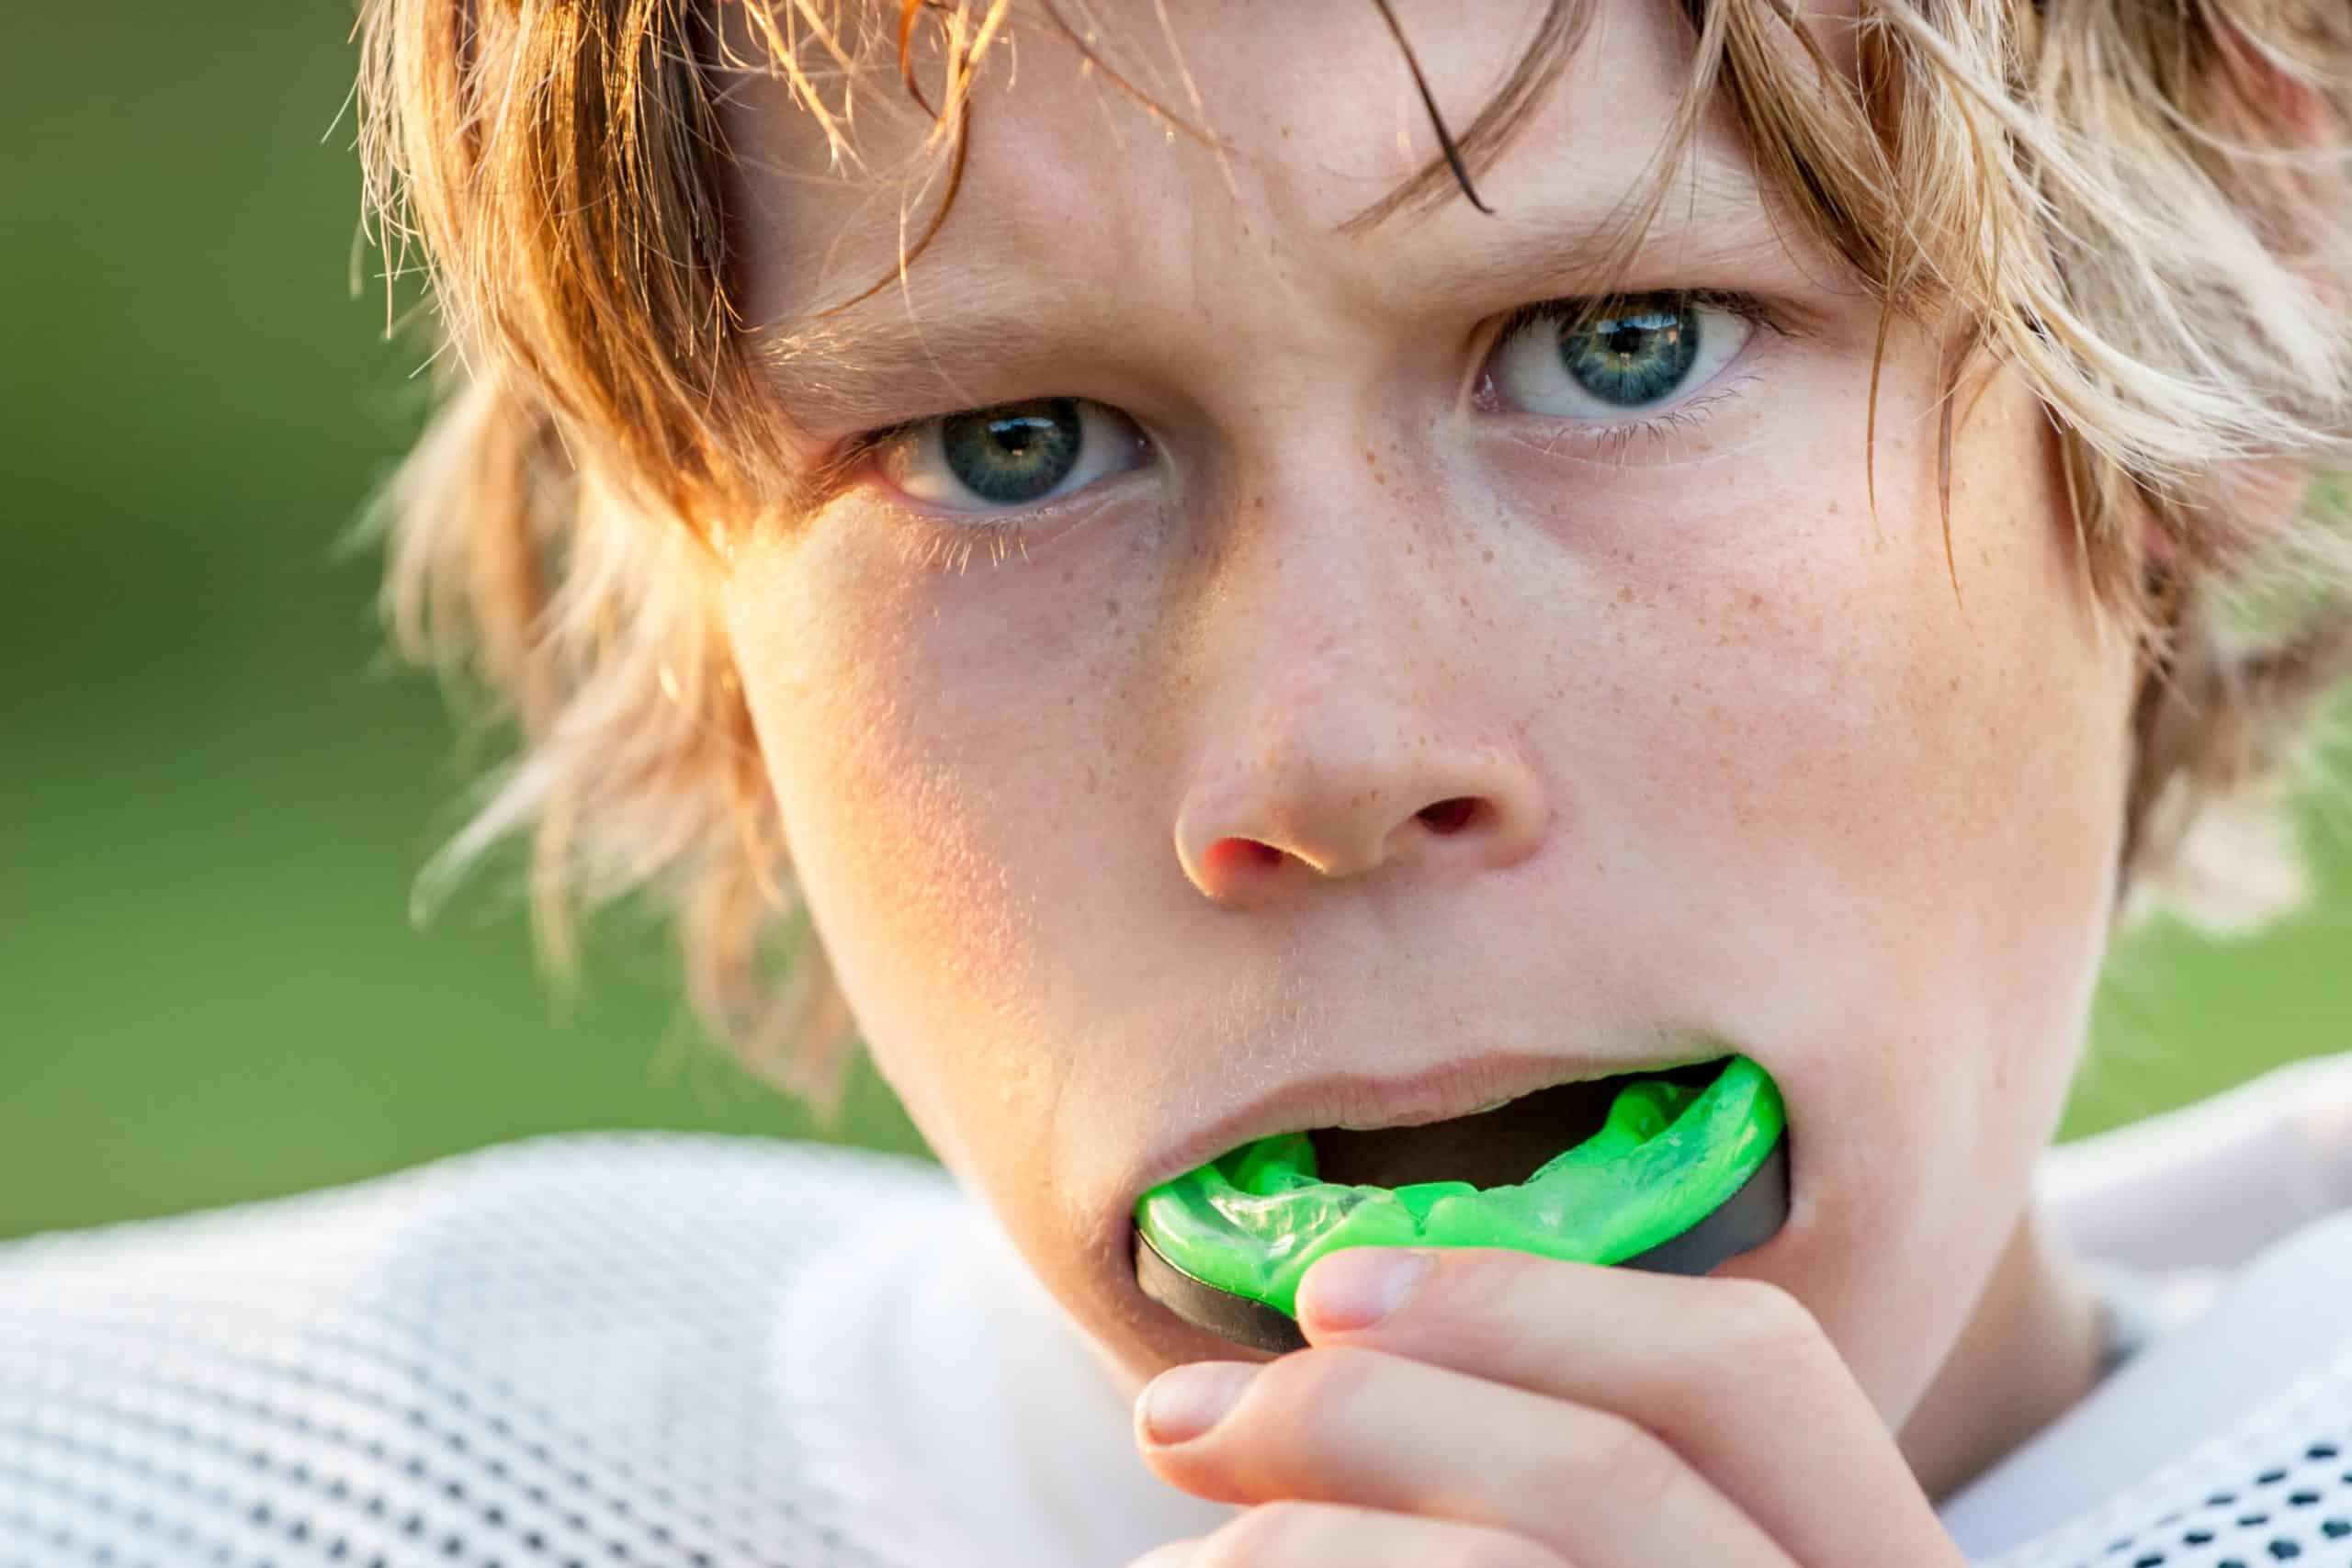 Why are Mouth Guards so important?